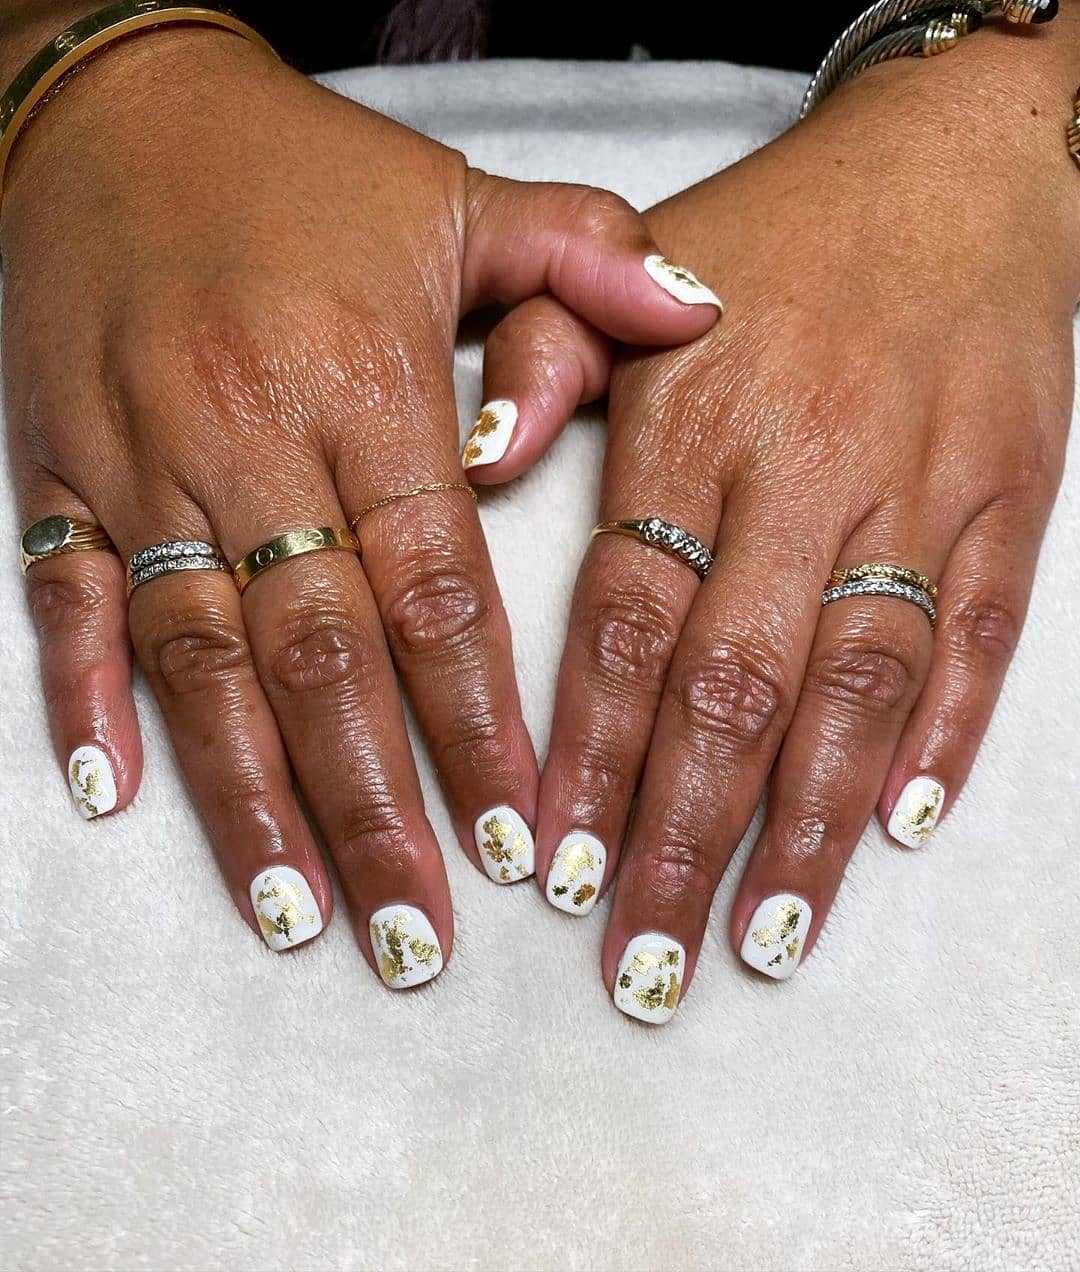 Two hands with long, manicured nails featuring white polish and floral designs, adorned with multiple rings on the fingers, resting on a white surface. - K. Charles & Co. in San Antonio and Schertz, TX